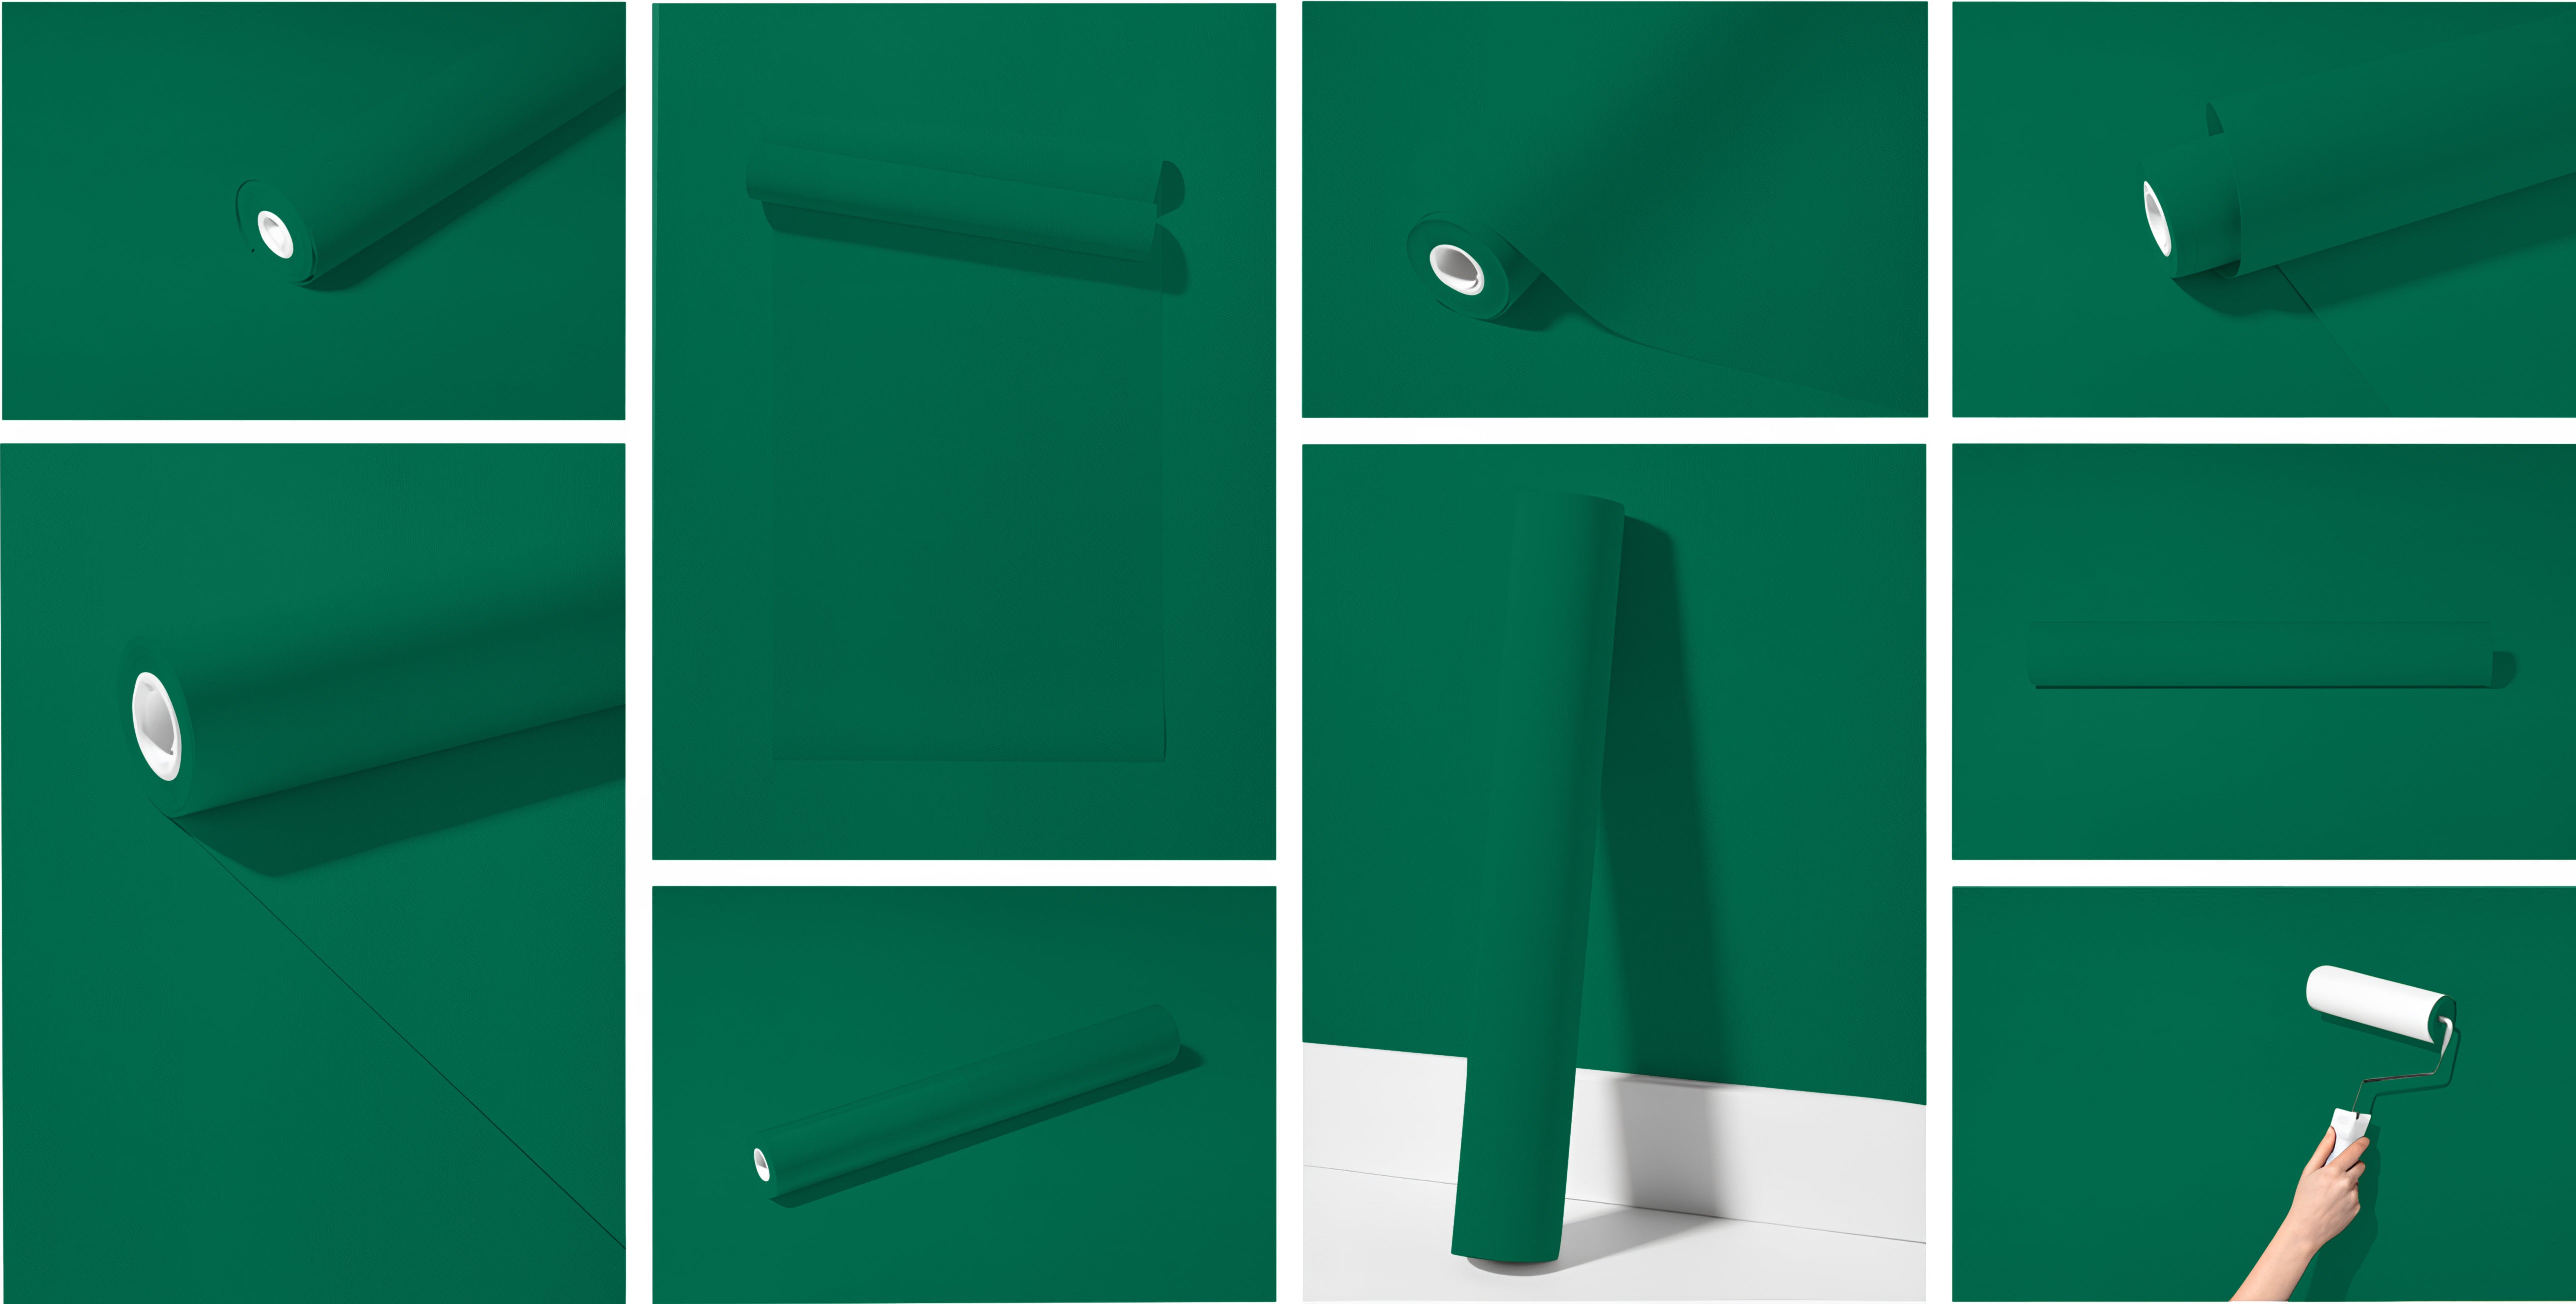 Peel & Stick Removable Re-usable Paint - Color RAL 6016 Turquoise Green - offRAL™ - RALRAW LLC, USA